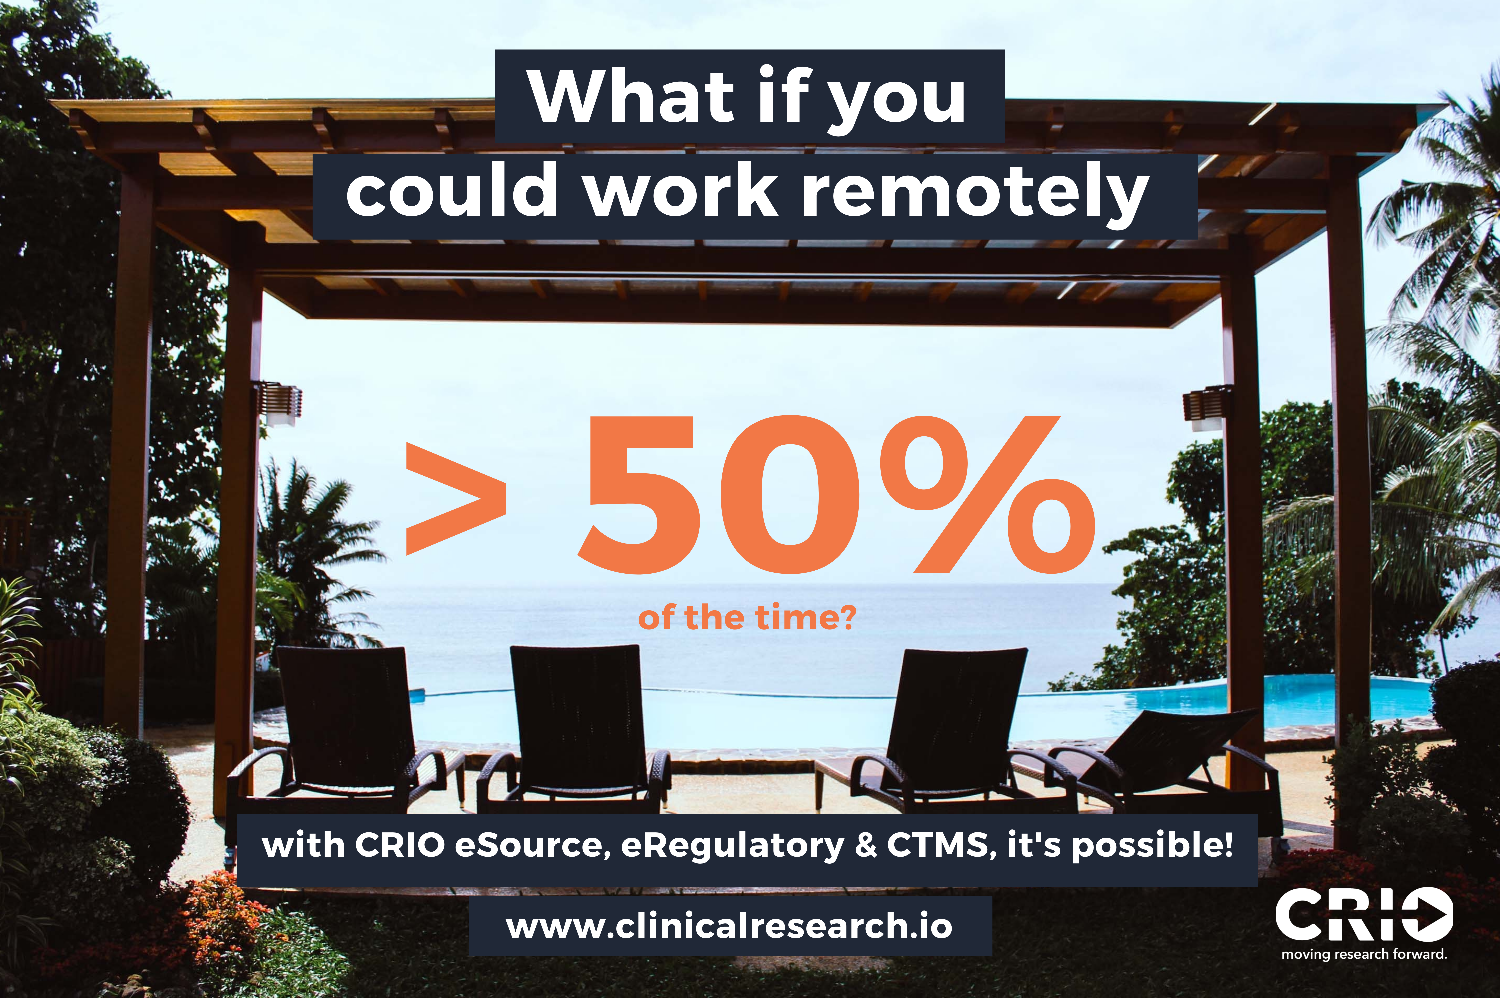 Work remotely, with CRIO.